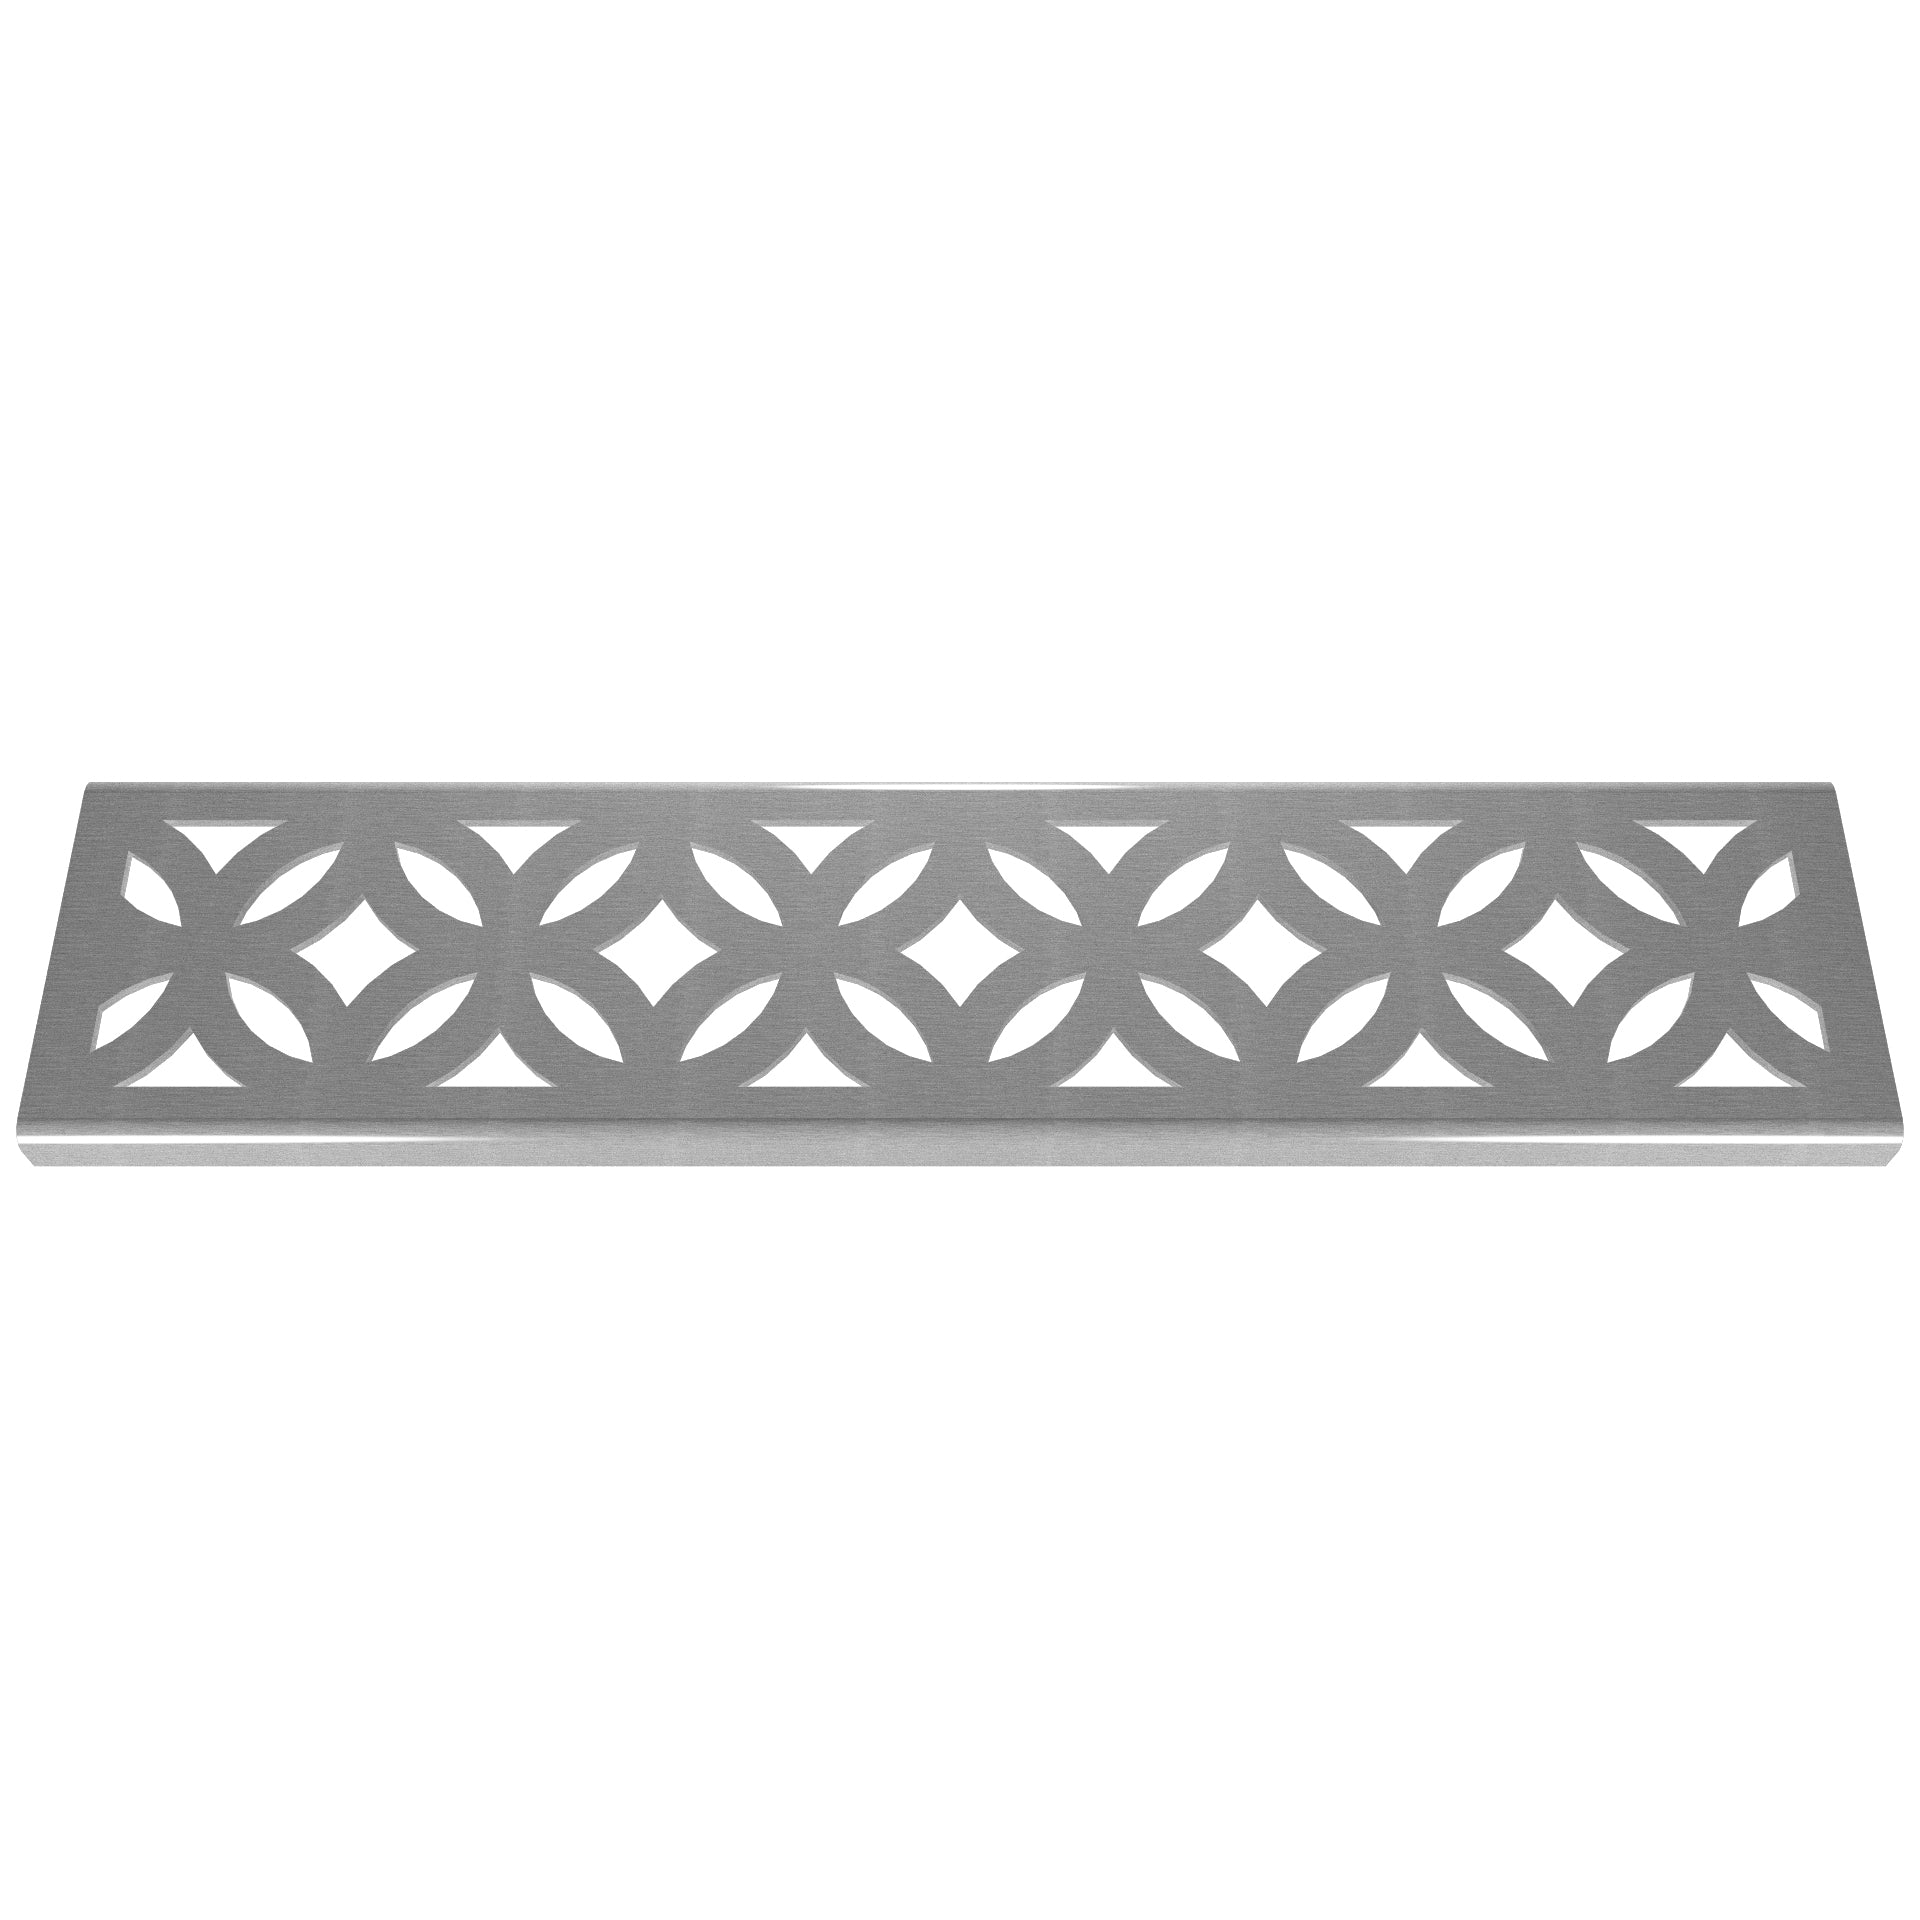 Archez 304 Stainless Steel Channel Drain Grate 75 x 913mm (3 Inch)